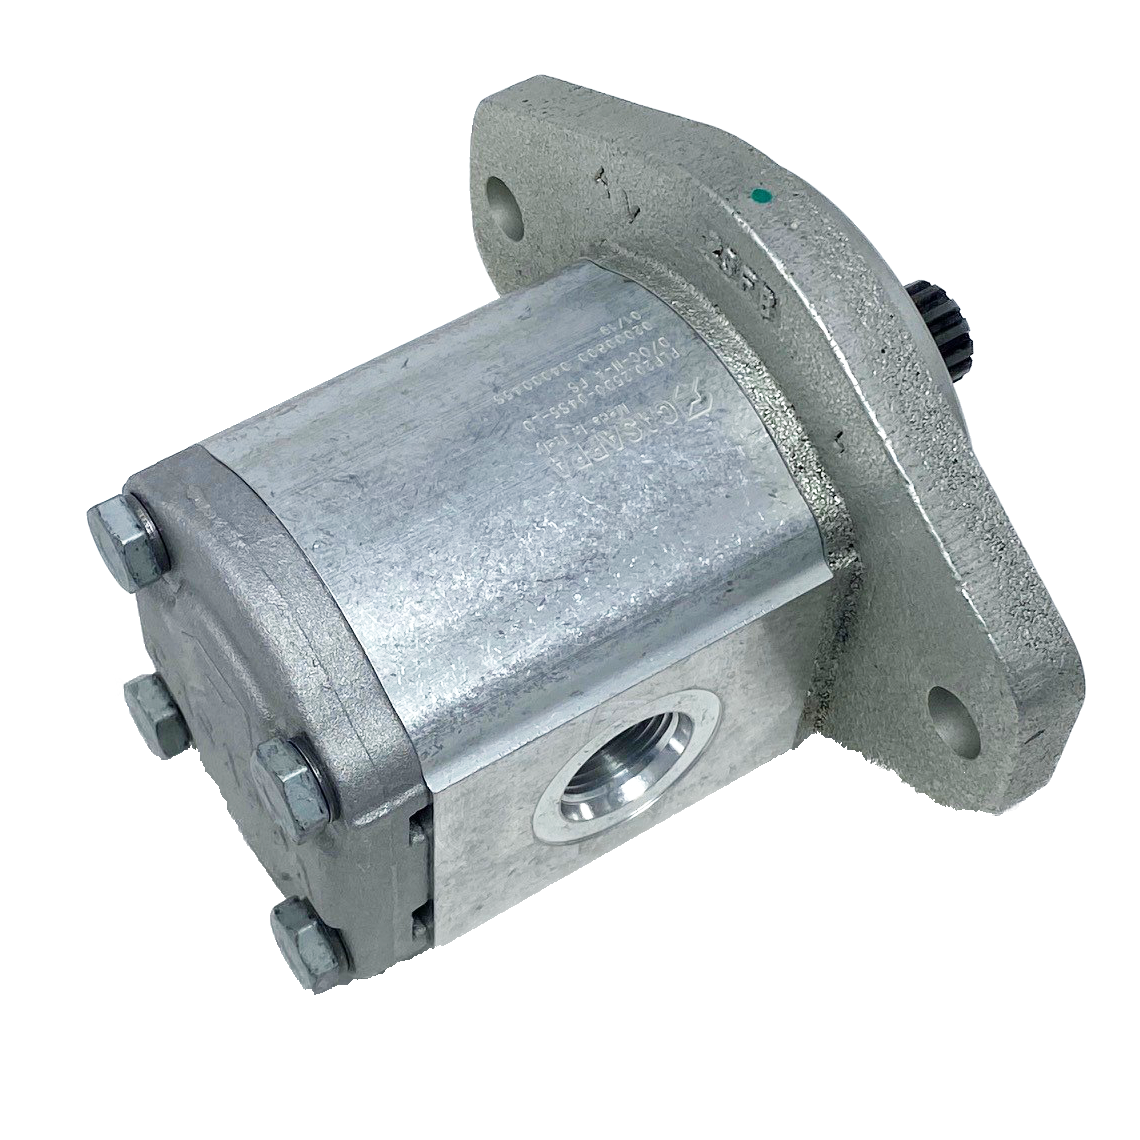 PHP20.25D0-04S5-LOG/OC-N-L : Casappa Polaris Gear Pump, 26.42cc, 3335psi Rated, 3000RPM, CW, 13T 16/32dp Shaft, SAE B 2-Bolt Flange, 1.25" #20 SAE Inlet, 0.625 (5/8") #10 SAE Outlet, Cast Iron Body Cast Iron Flange And Cover